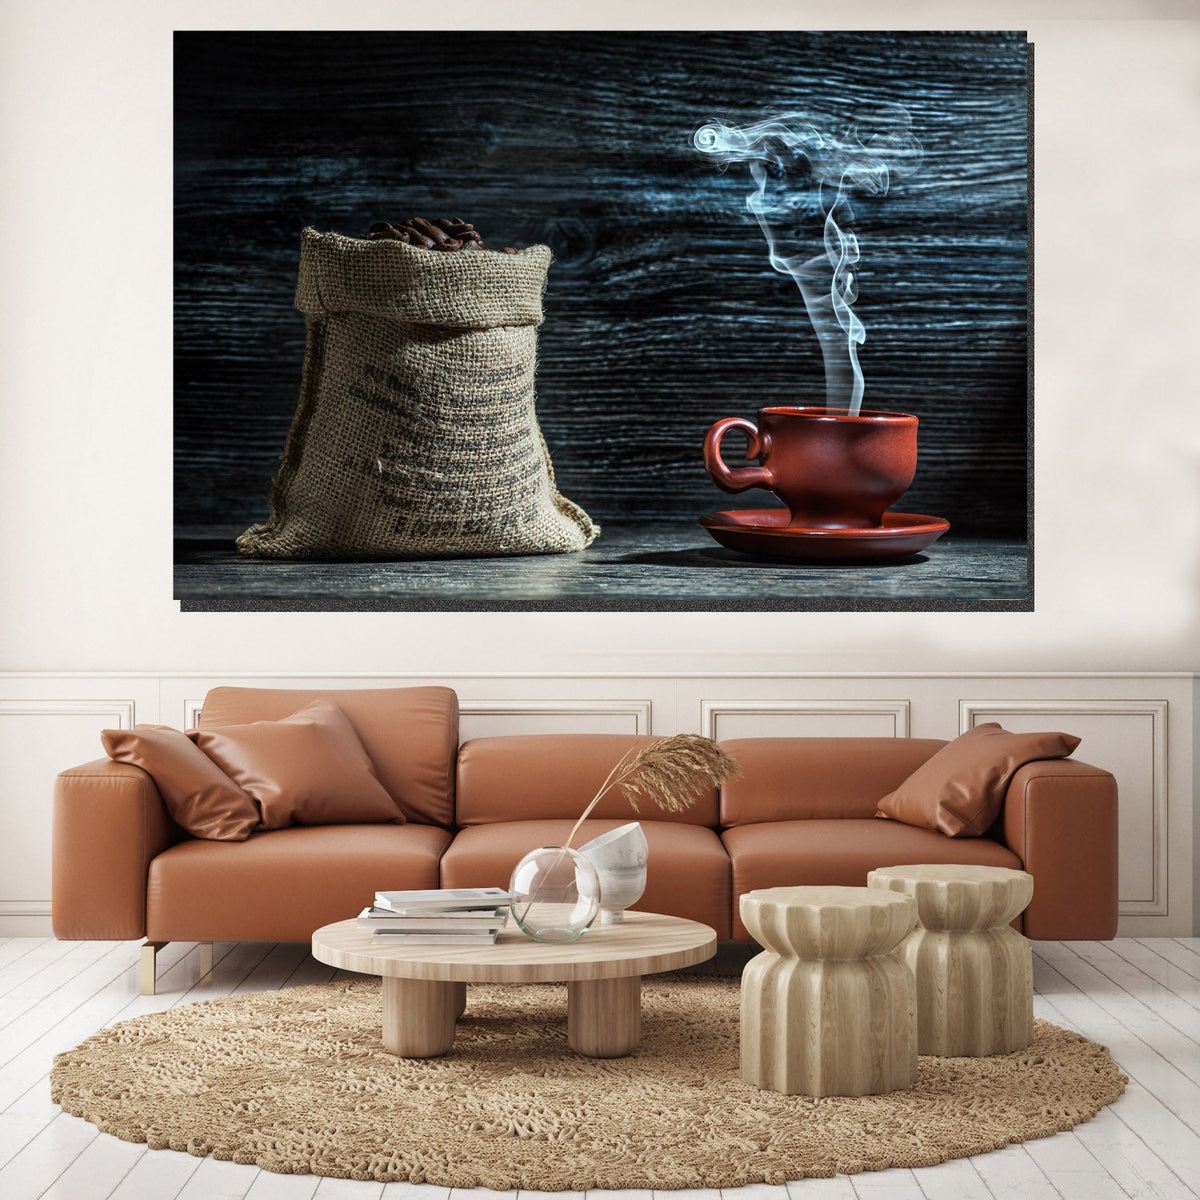 https://cdn.shopify.com/s/files/1/0387/9986/8044/products/SteamingCupofCoffeeCanvasArtprintStretched-1.jpg